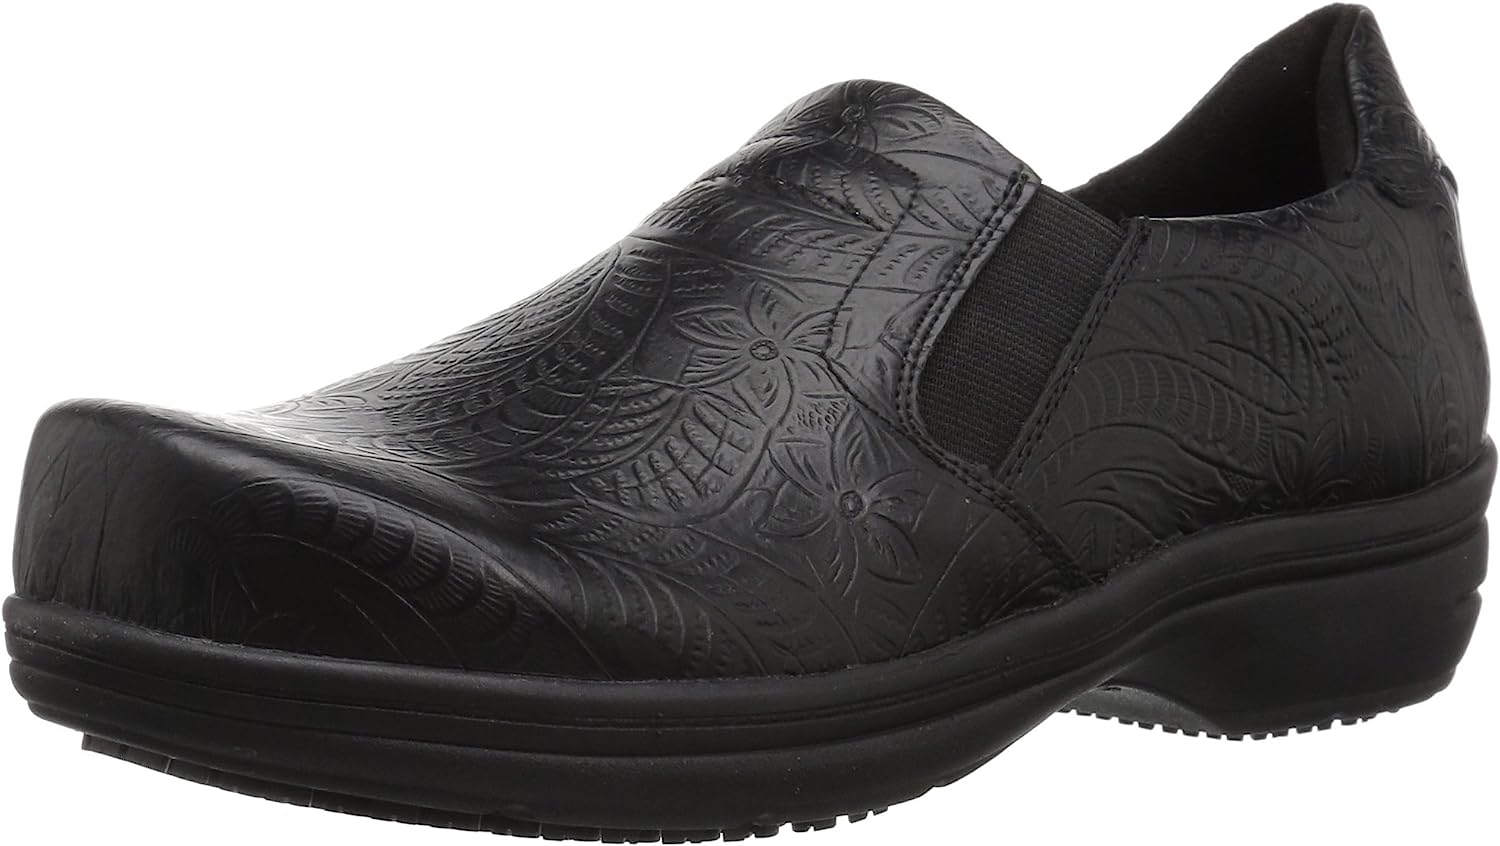 Easy Works Women's Bind Health Care Professional Shoe